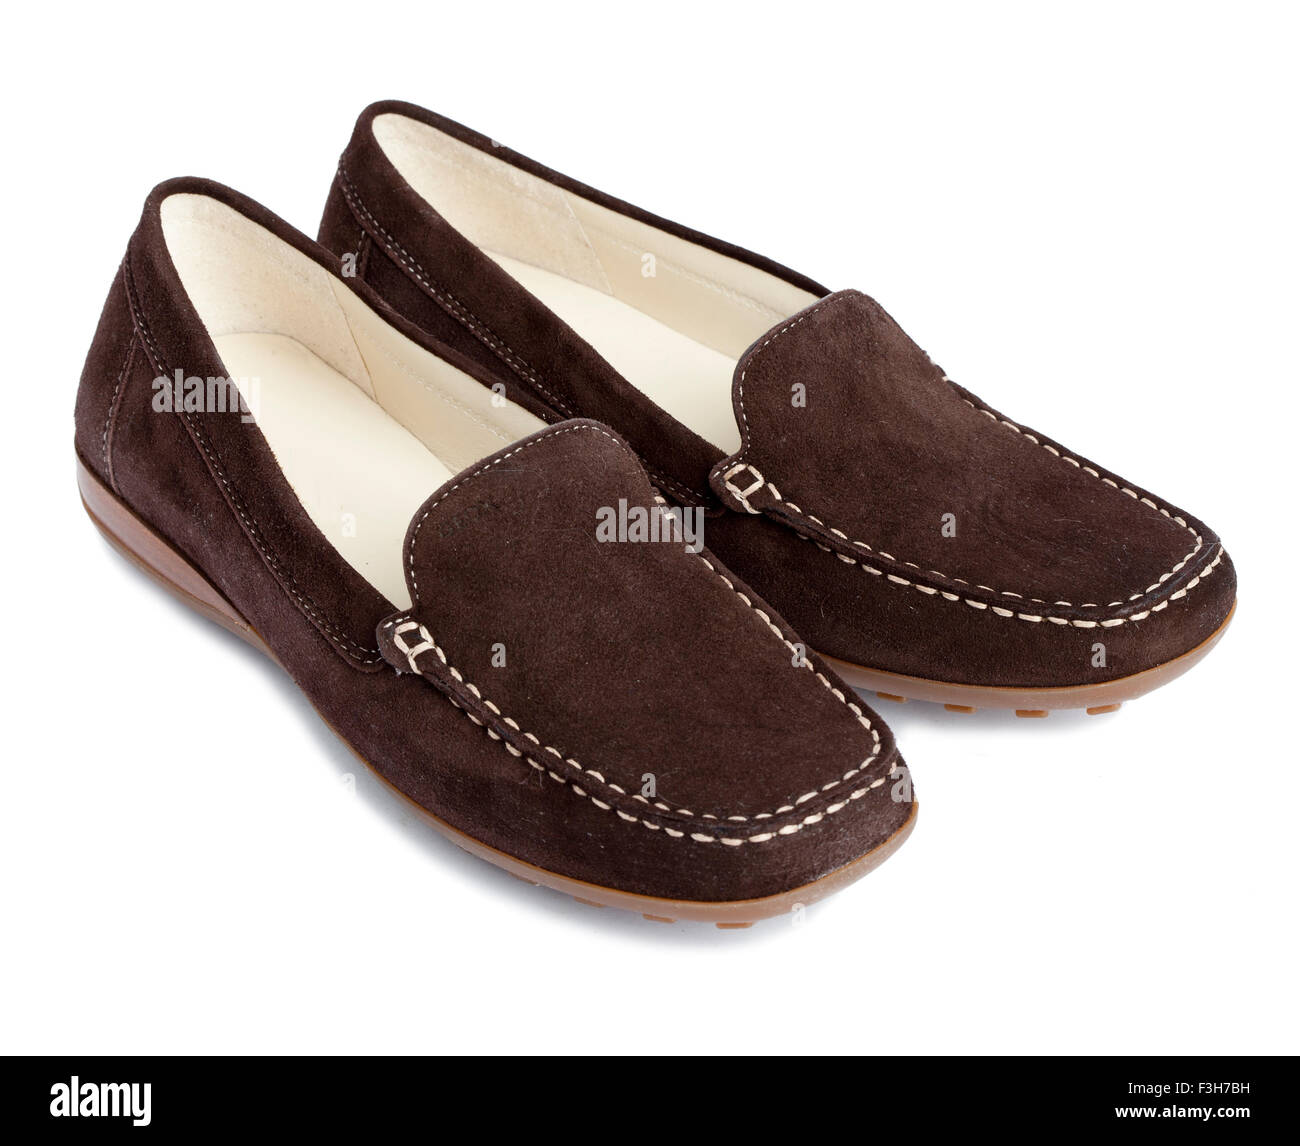 Women Moccasins High Resolution Stock Photography and Images - Alamy